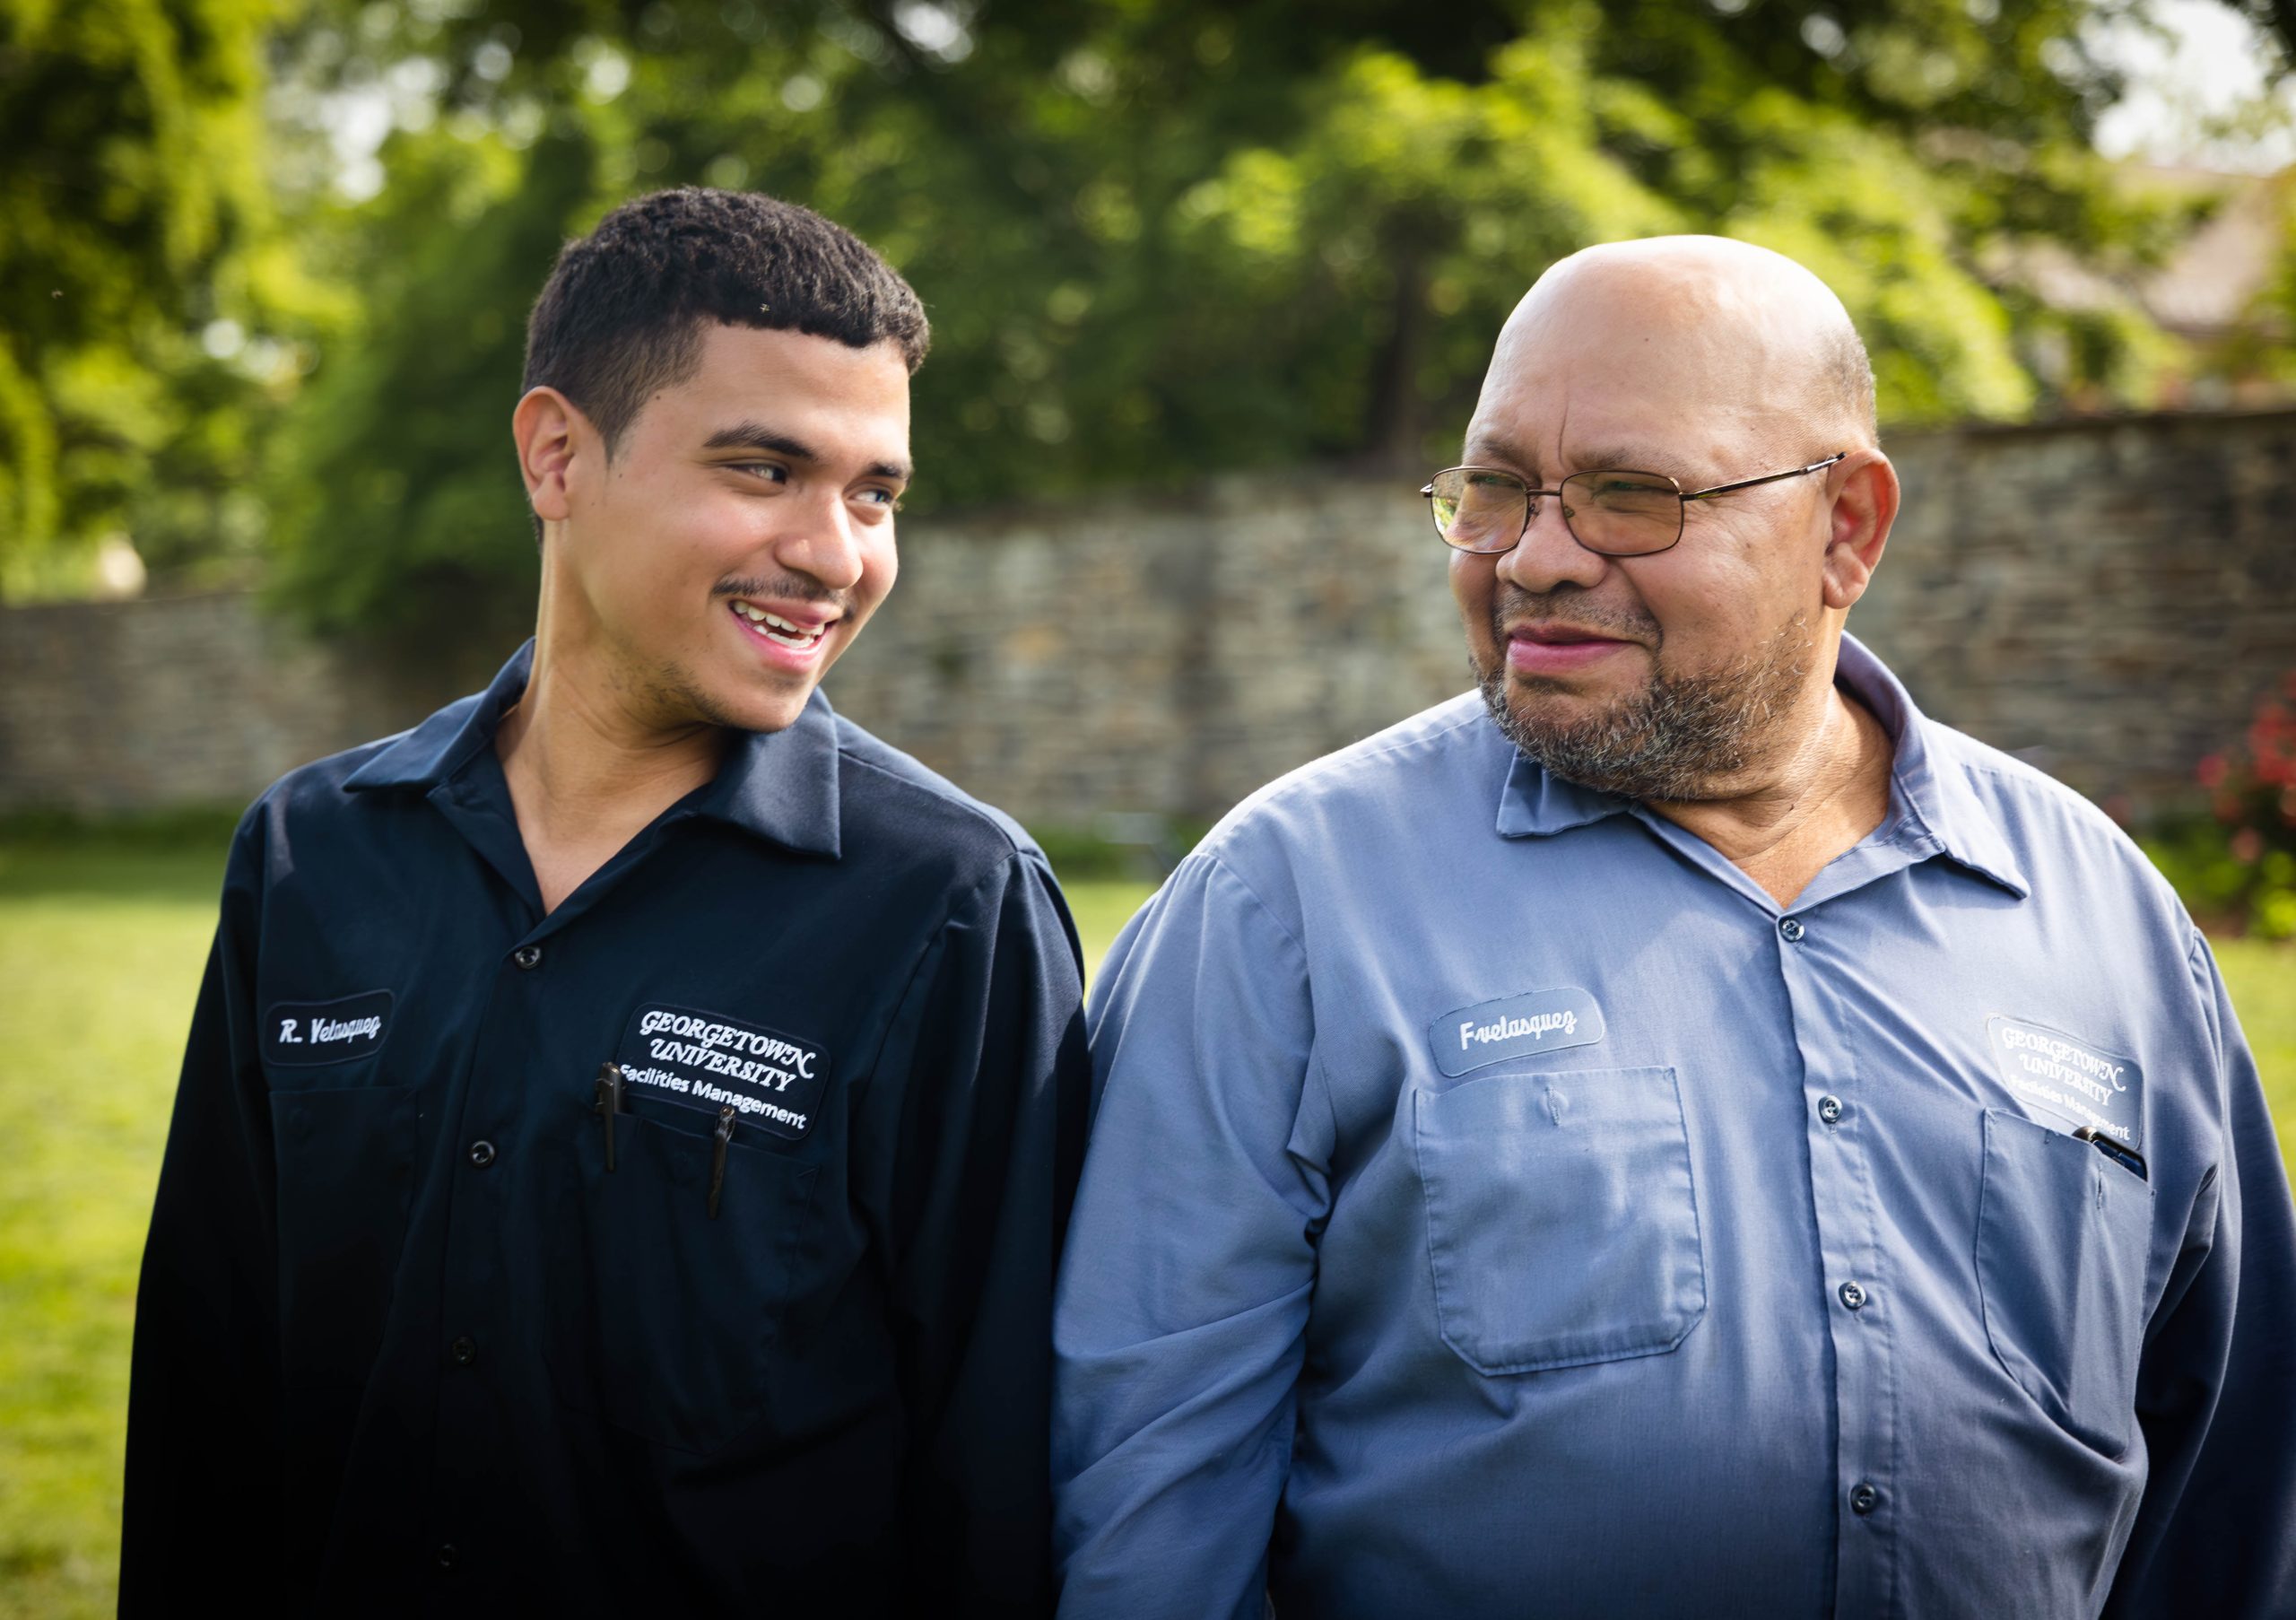 Reynaldo Velasquez stands with his back to his father, Francisco Velasquez, as they smile at one another. They both wear suits as part of Georgetown's facilities team and stand on the lawn outside.